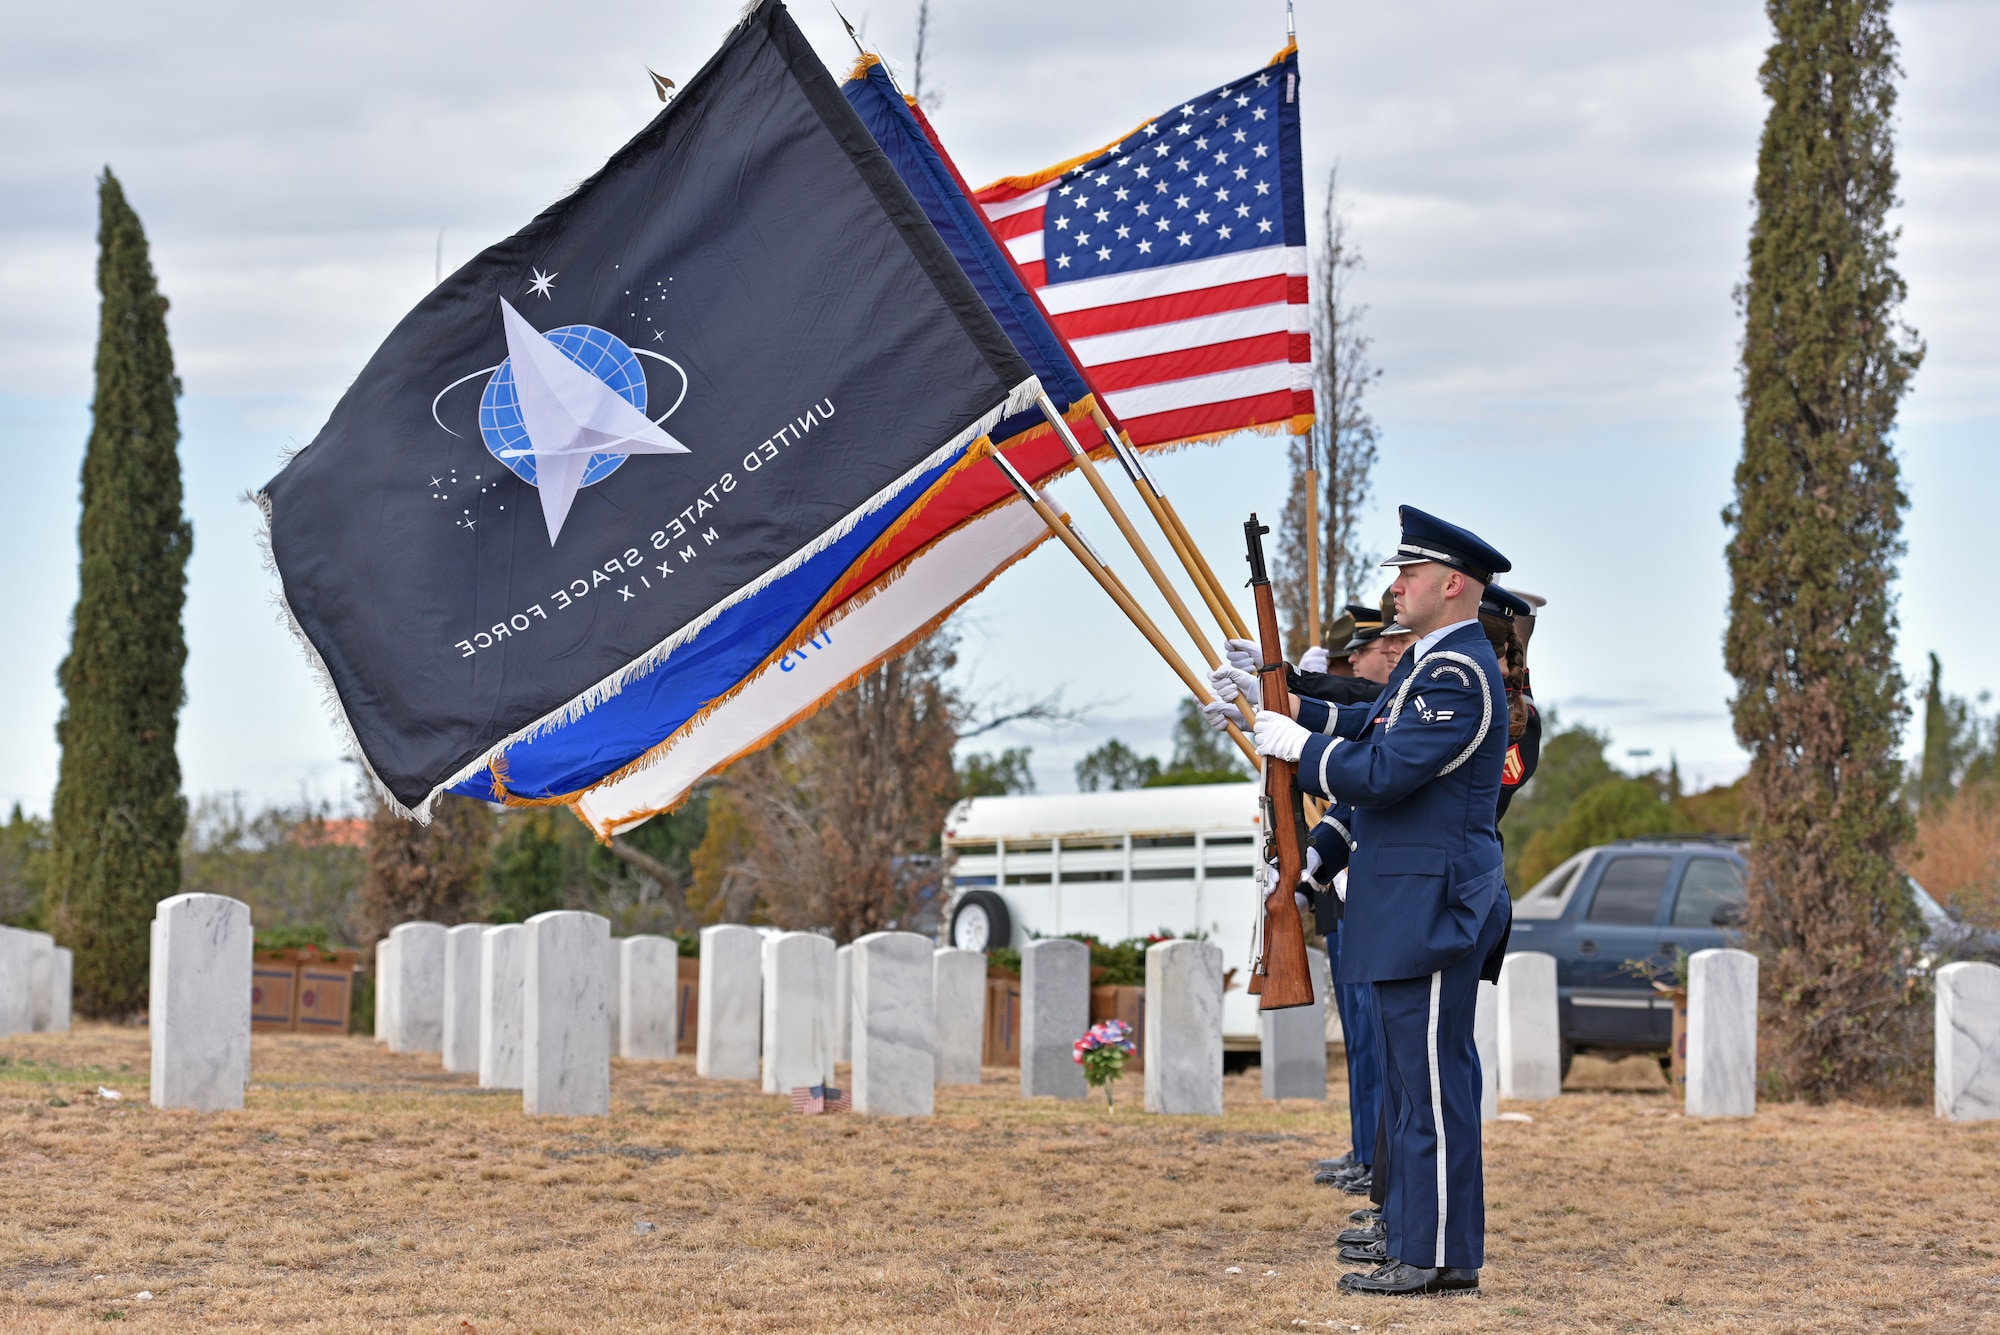 The Goodfellow Joint Service Color Guard presents the colors during the Wreaths Across America ceremony at Belvedere Memorial Park Cemetery in San Angelo, Texas, Dec. 18, 2021. Members from Goodfellow Air Force Base and the San Angelo community joined together to honor veterans. (U.S. Air Force photo by Senior Airman Ashley Thrash)